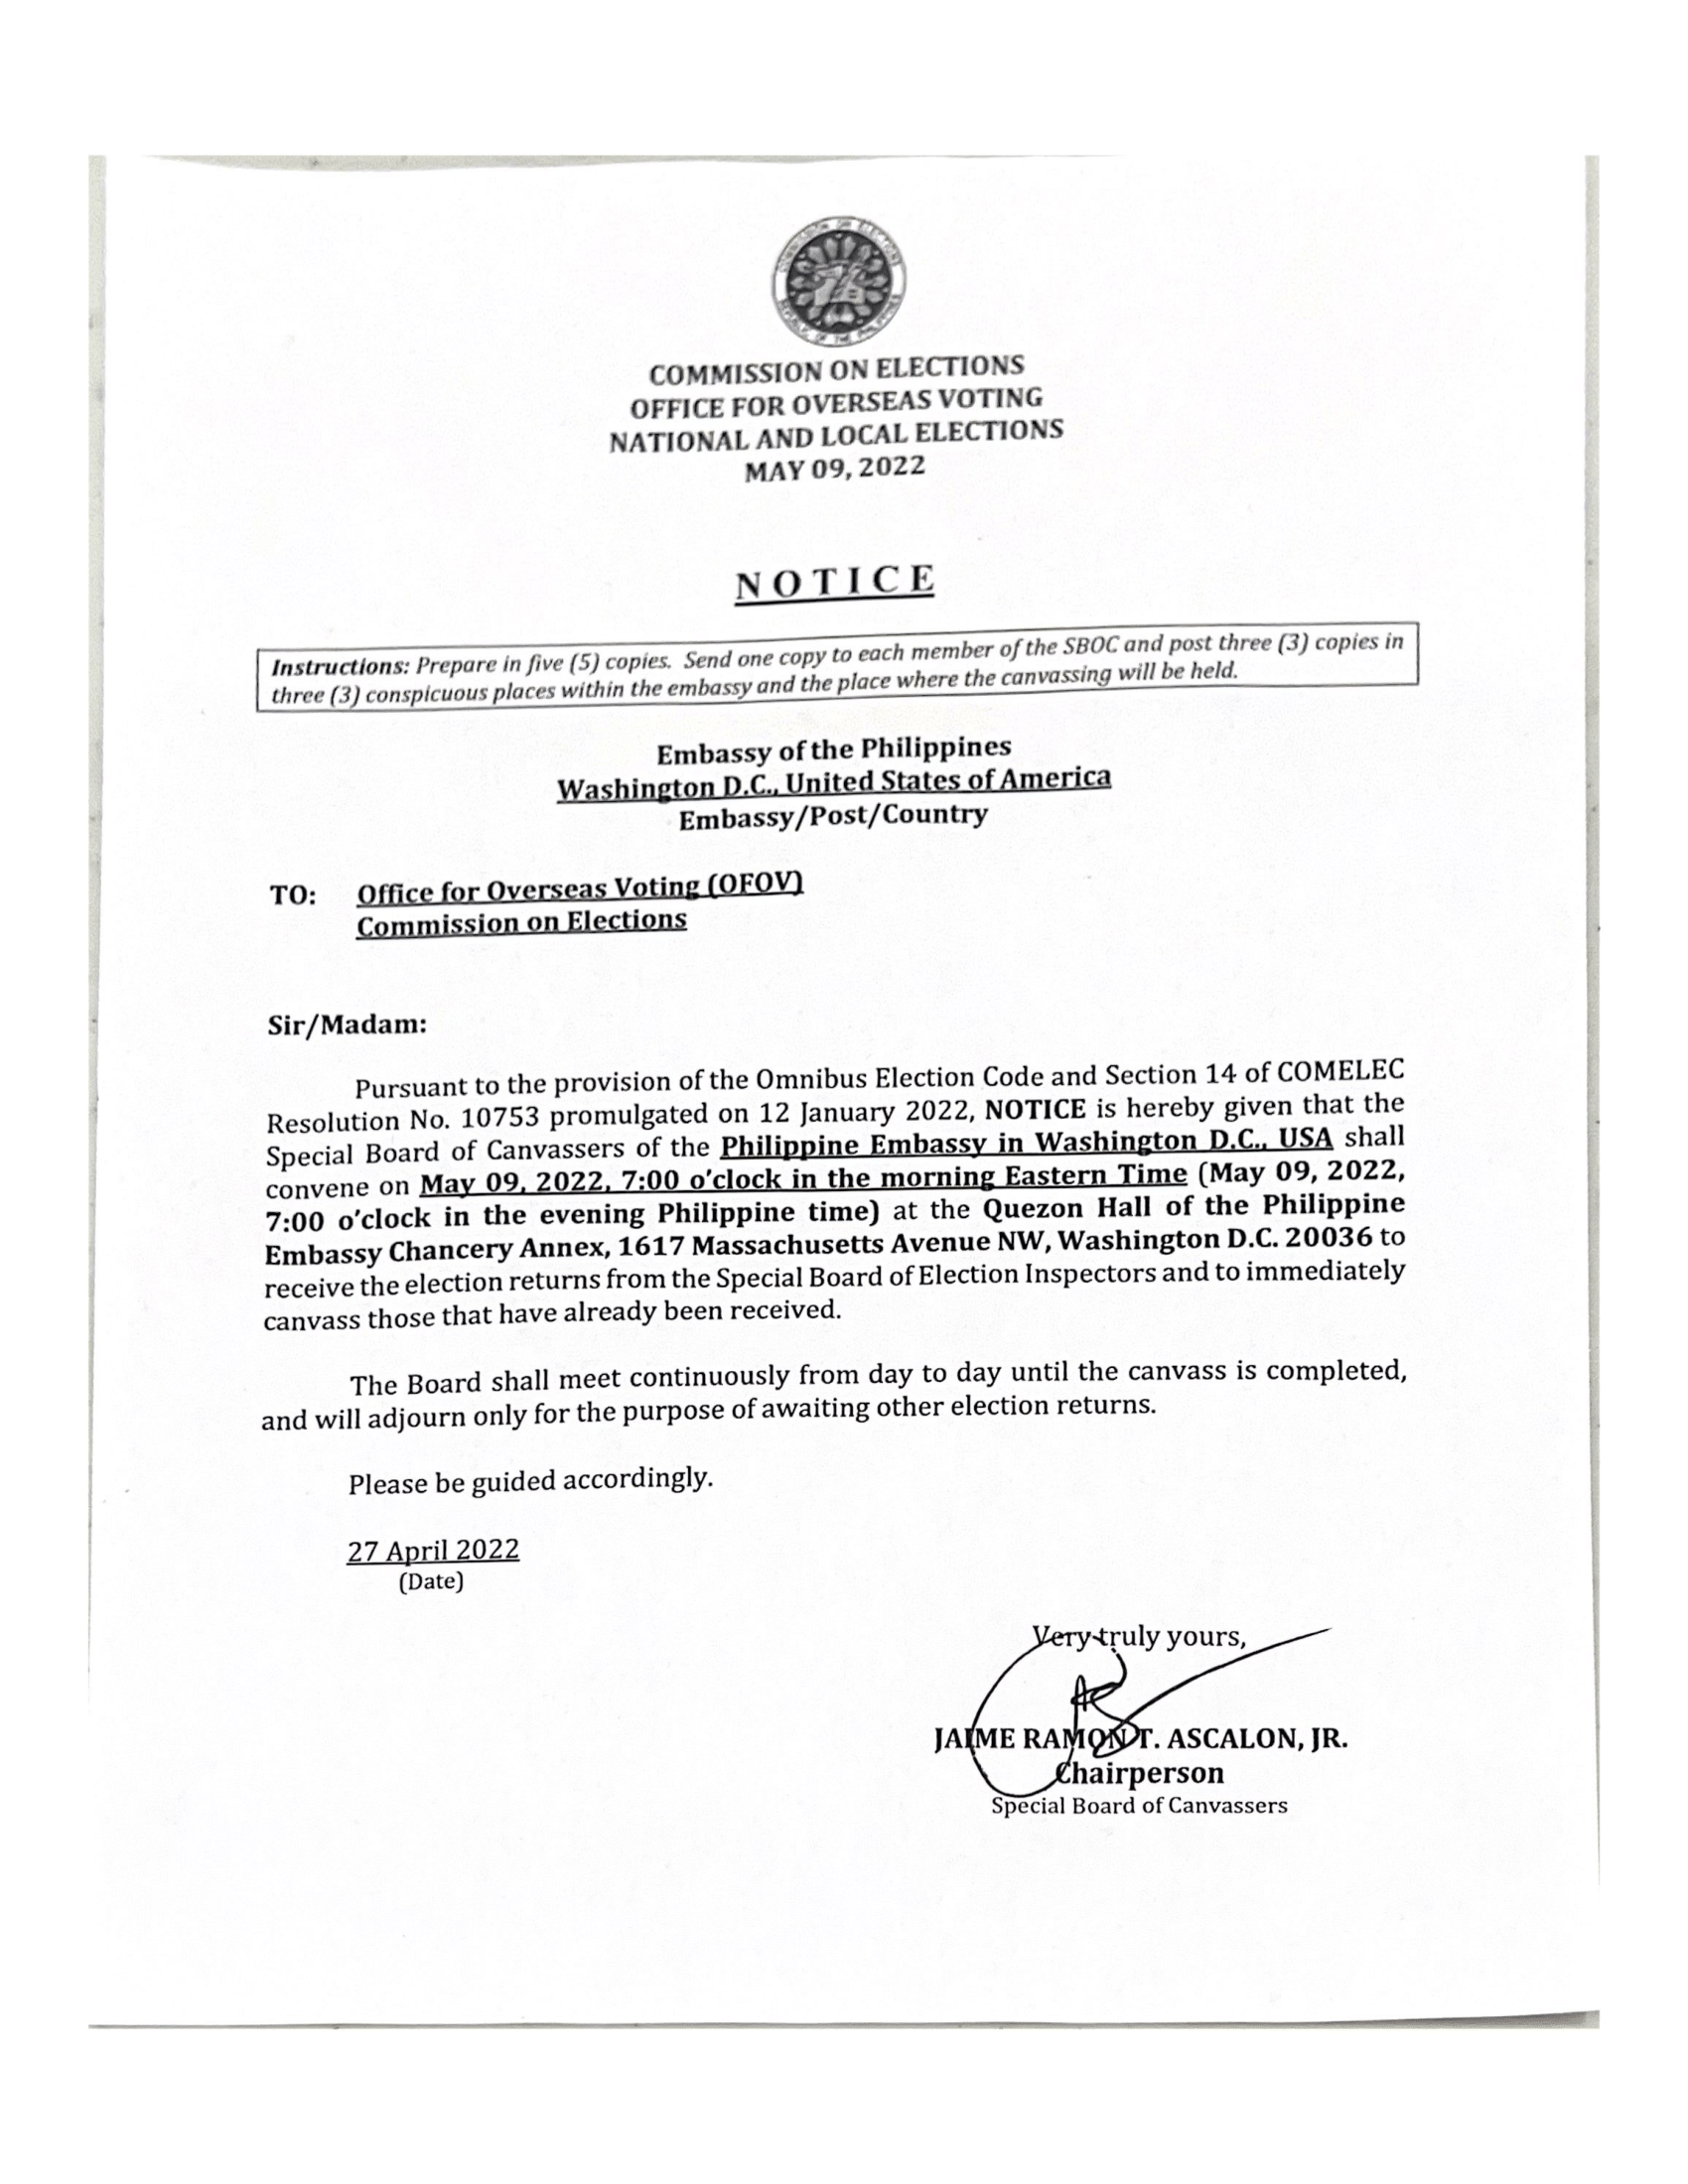 NOTICE OF MEETING OF THE SPECIAL BOARD OF CANVASSERS (SBOC)